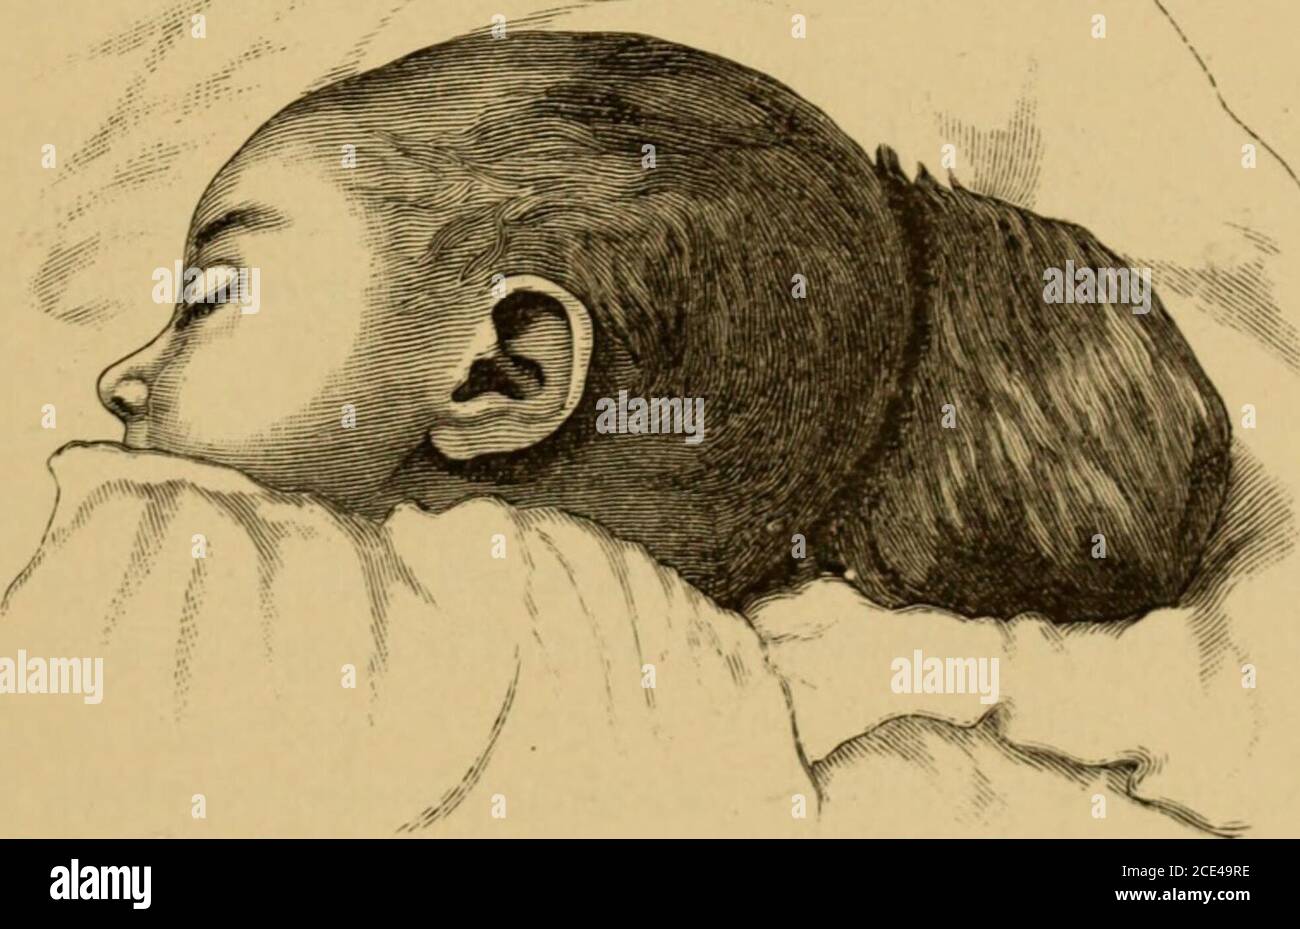 . A system of obstetrics . through which the pro-trusion takes place is at the median line, or near it, anterior or pos- MENINGOCELE, ENCEPHALOCELE, HYDRENCEPHALOCELE. 655 terior to the occipital protuberance. The opening, if in the anteriorpart of the occipital bone, may extend to the fontanelle; if in the pos-terior part, it may extend to the foramen magnum. It may connectposteriorly through the foramen magnum with the cleft of a spina bifida.If the opening in the occipital bone be large, the tumor is also usuallylarge. Prescott Hewitt cites a case in which it extended to the loins;but so la Stock Photo